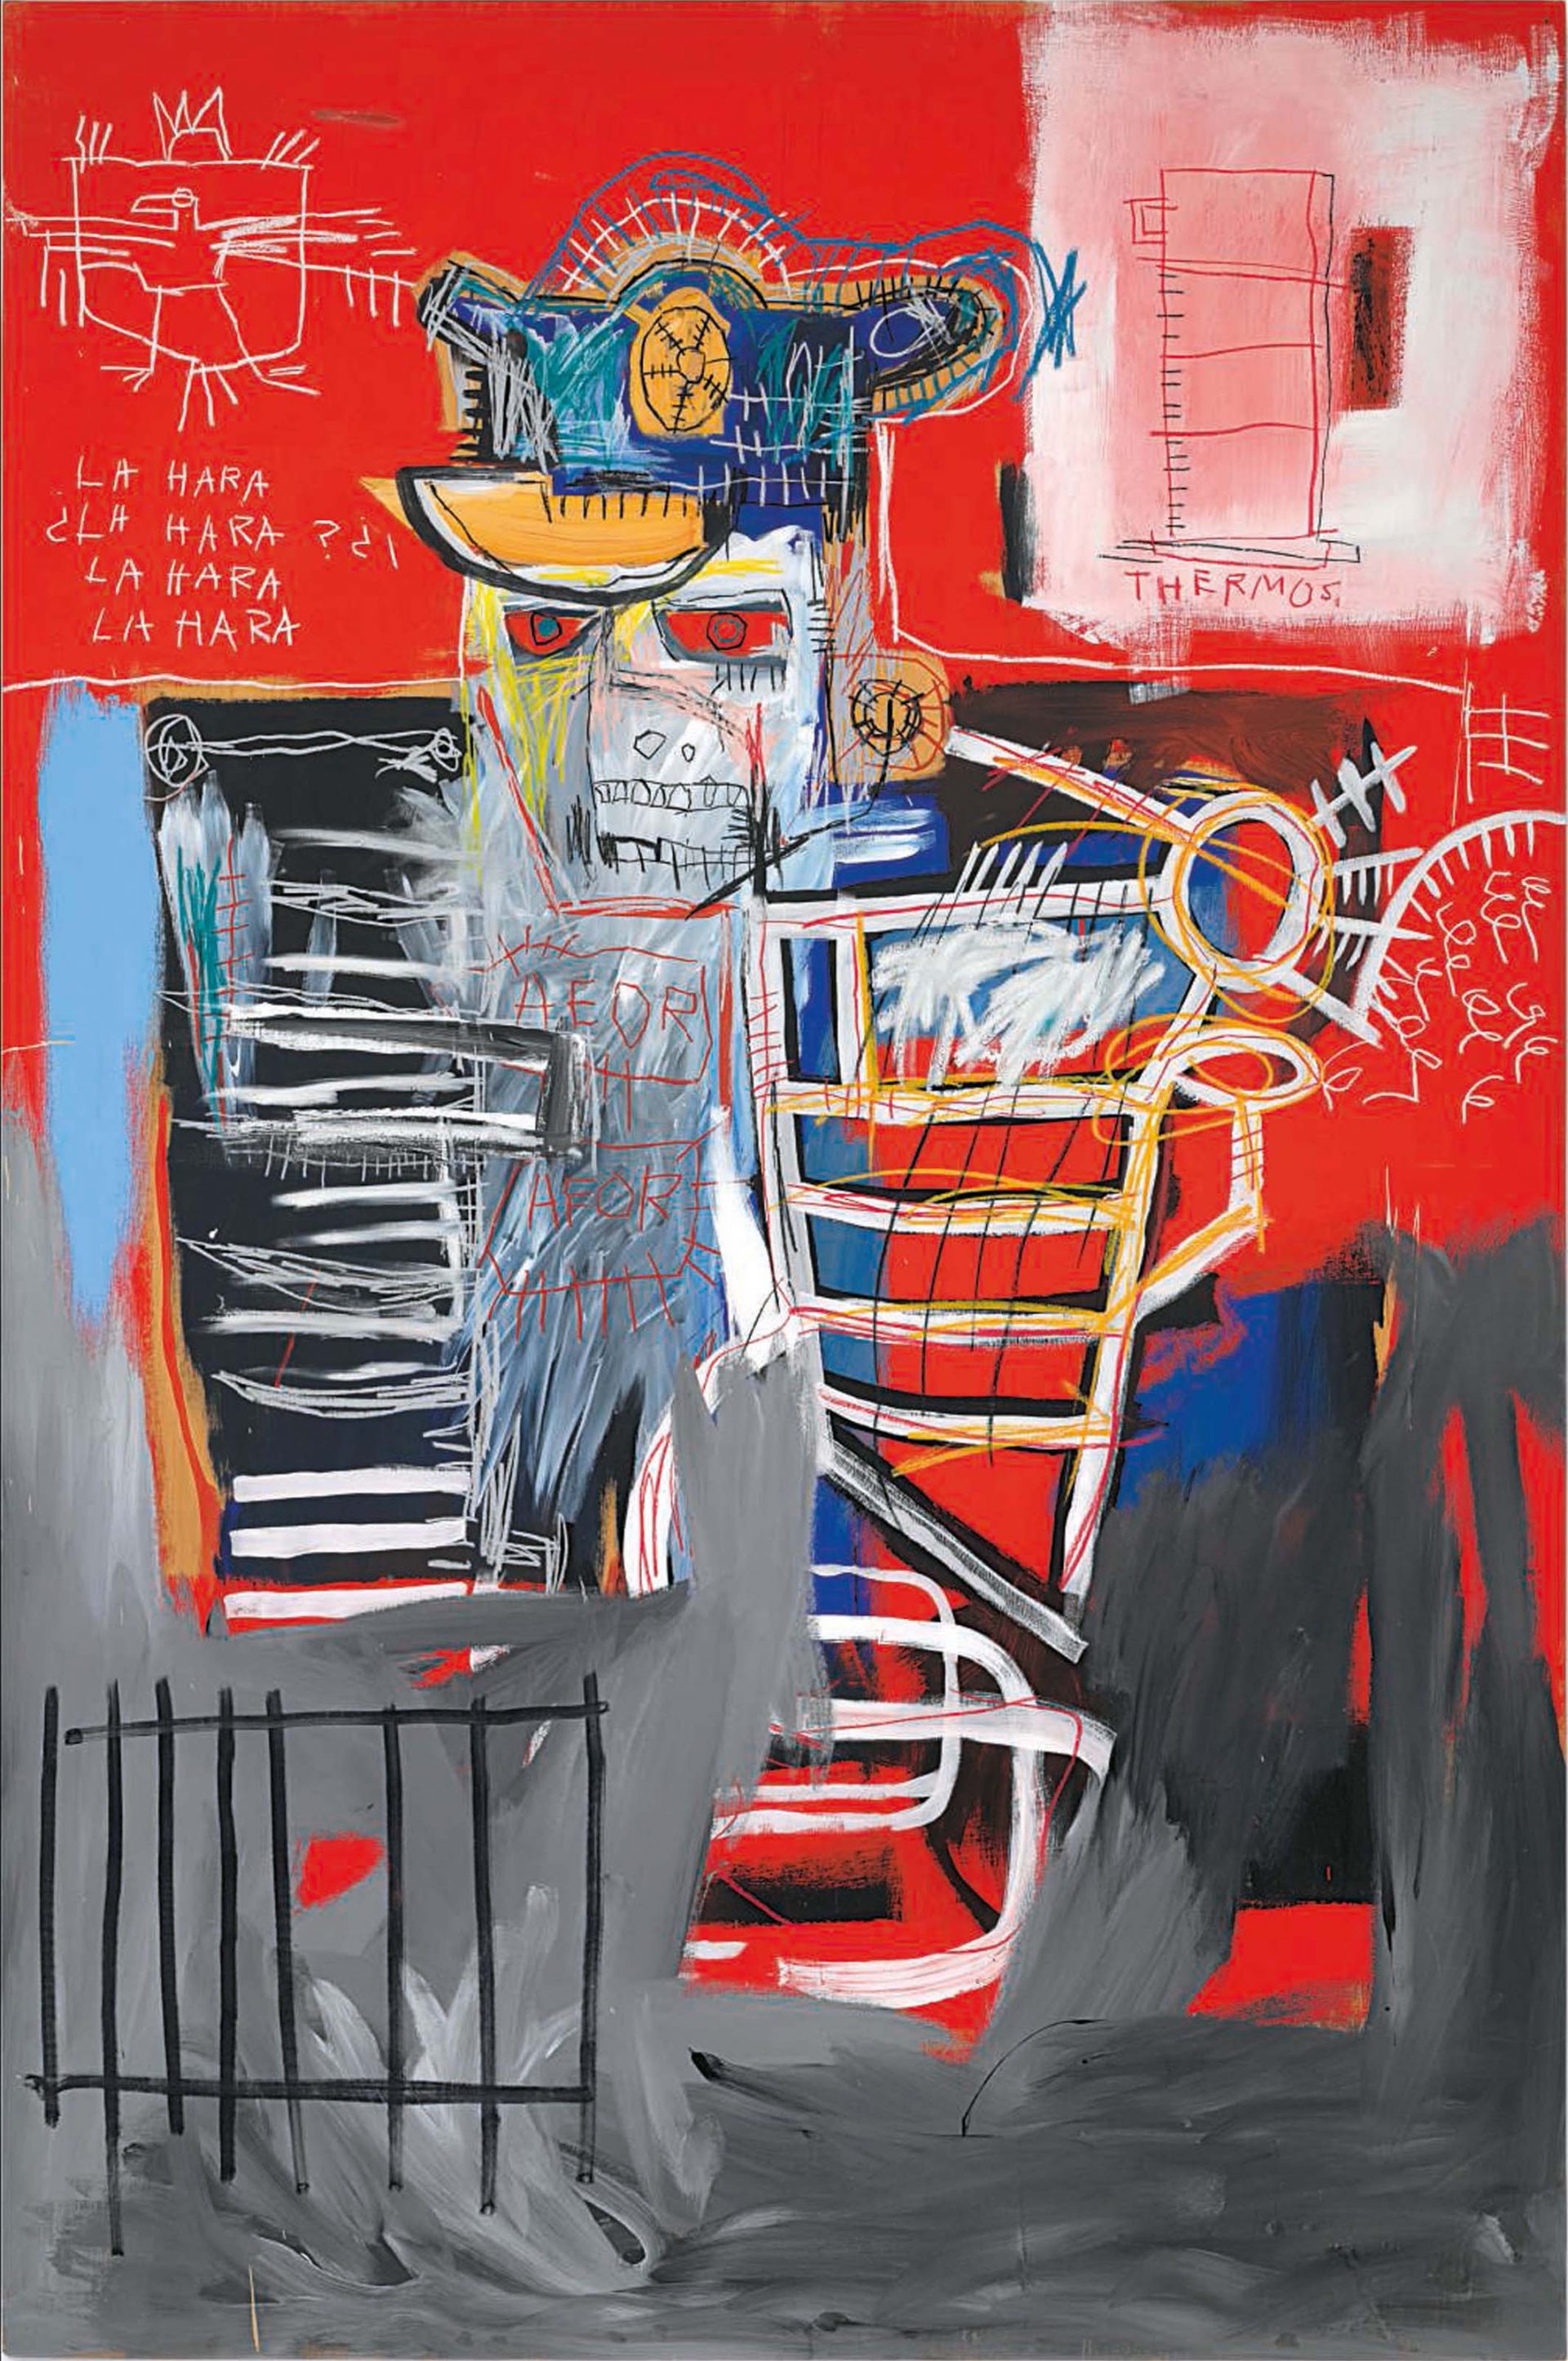 Jean-Michel Basquiat's 1981 painting “La Hara” featuring an intense, skeletal white figure against a bold red backdrop. A peaked cap sits atop the figure's head and “LA HARA” is scrawled multiple times on the left. The bottom section depicts gray steel bars, hinting at imprisonment. The artwork is filled with vivid colors and diagram-like elements, characteristic of Basquiat's style.